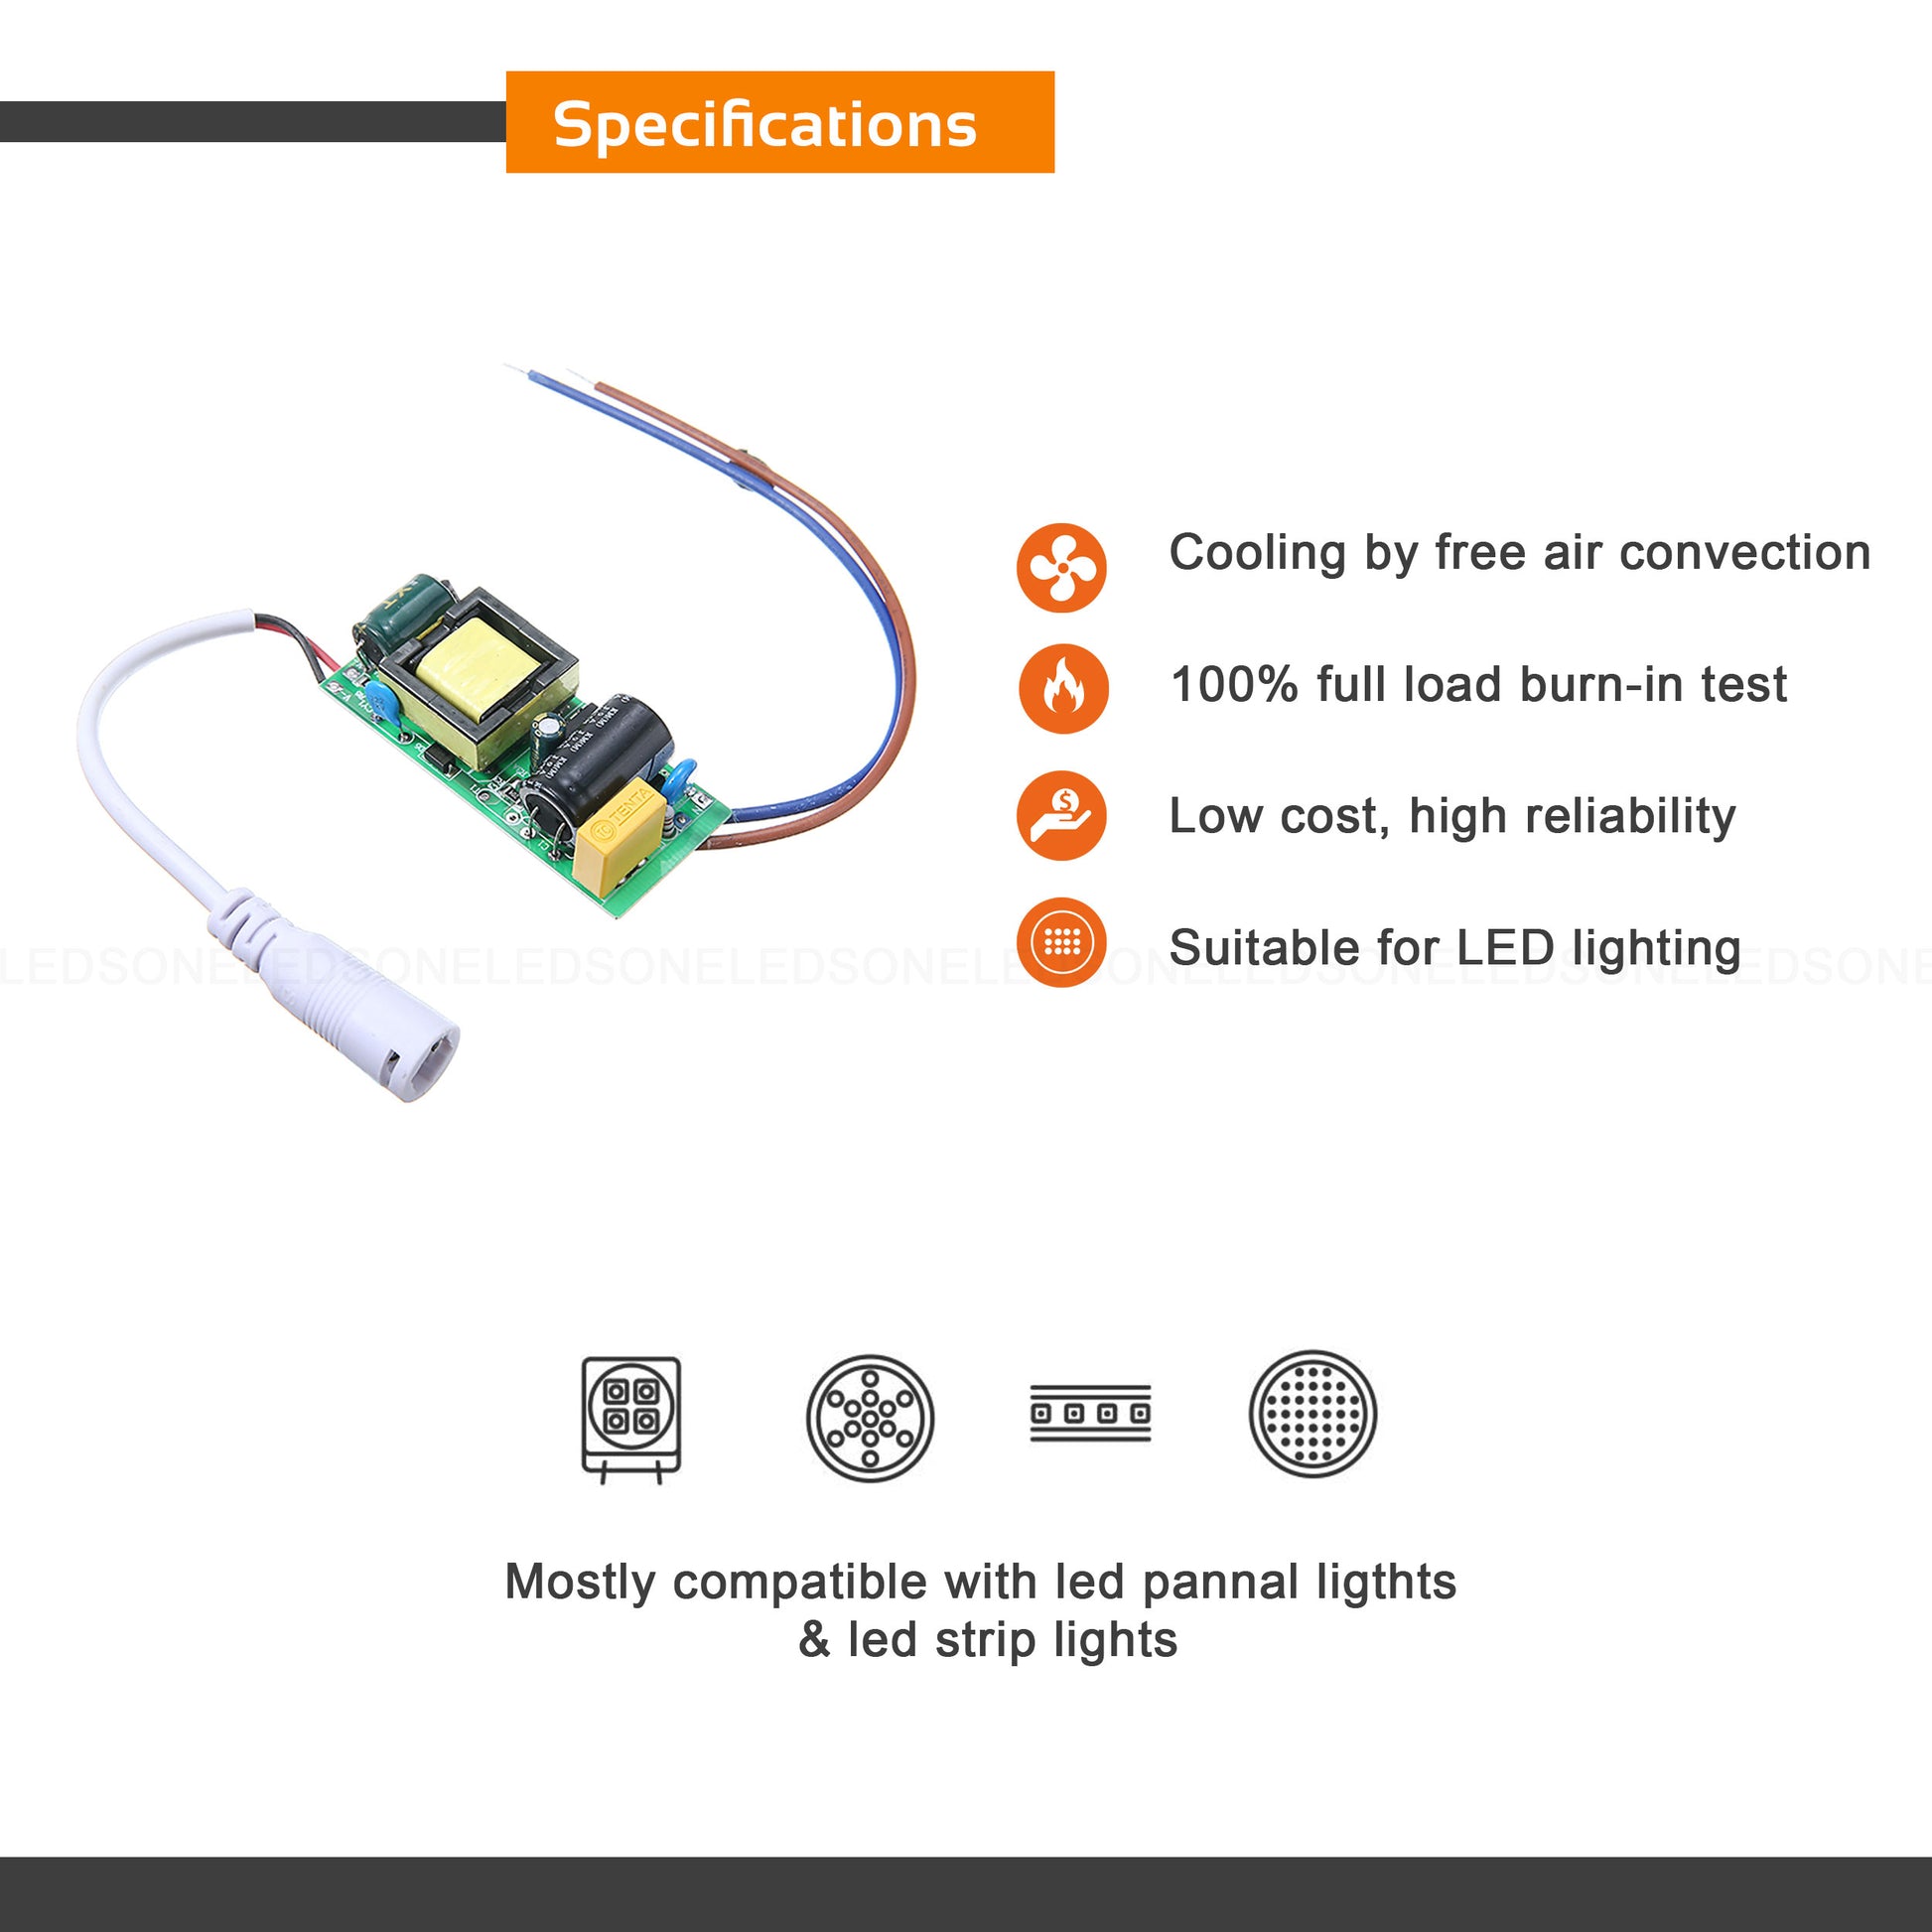 Specifications of 36w 600mAmp LED Driver